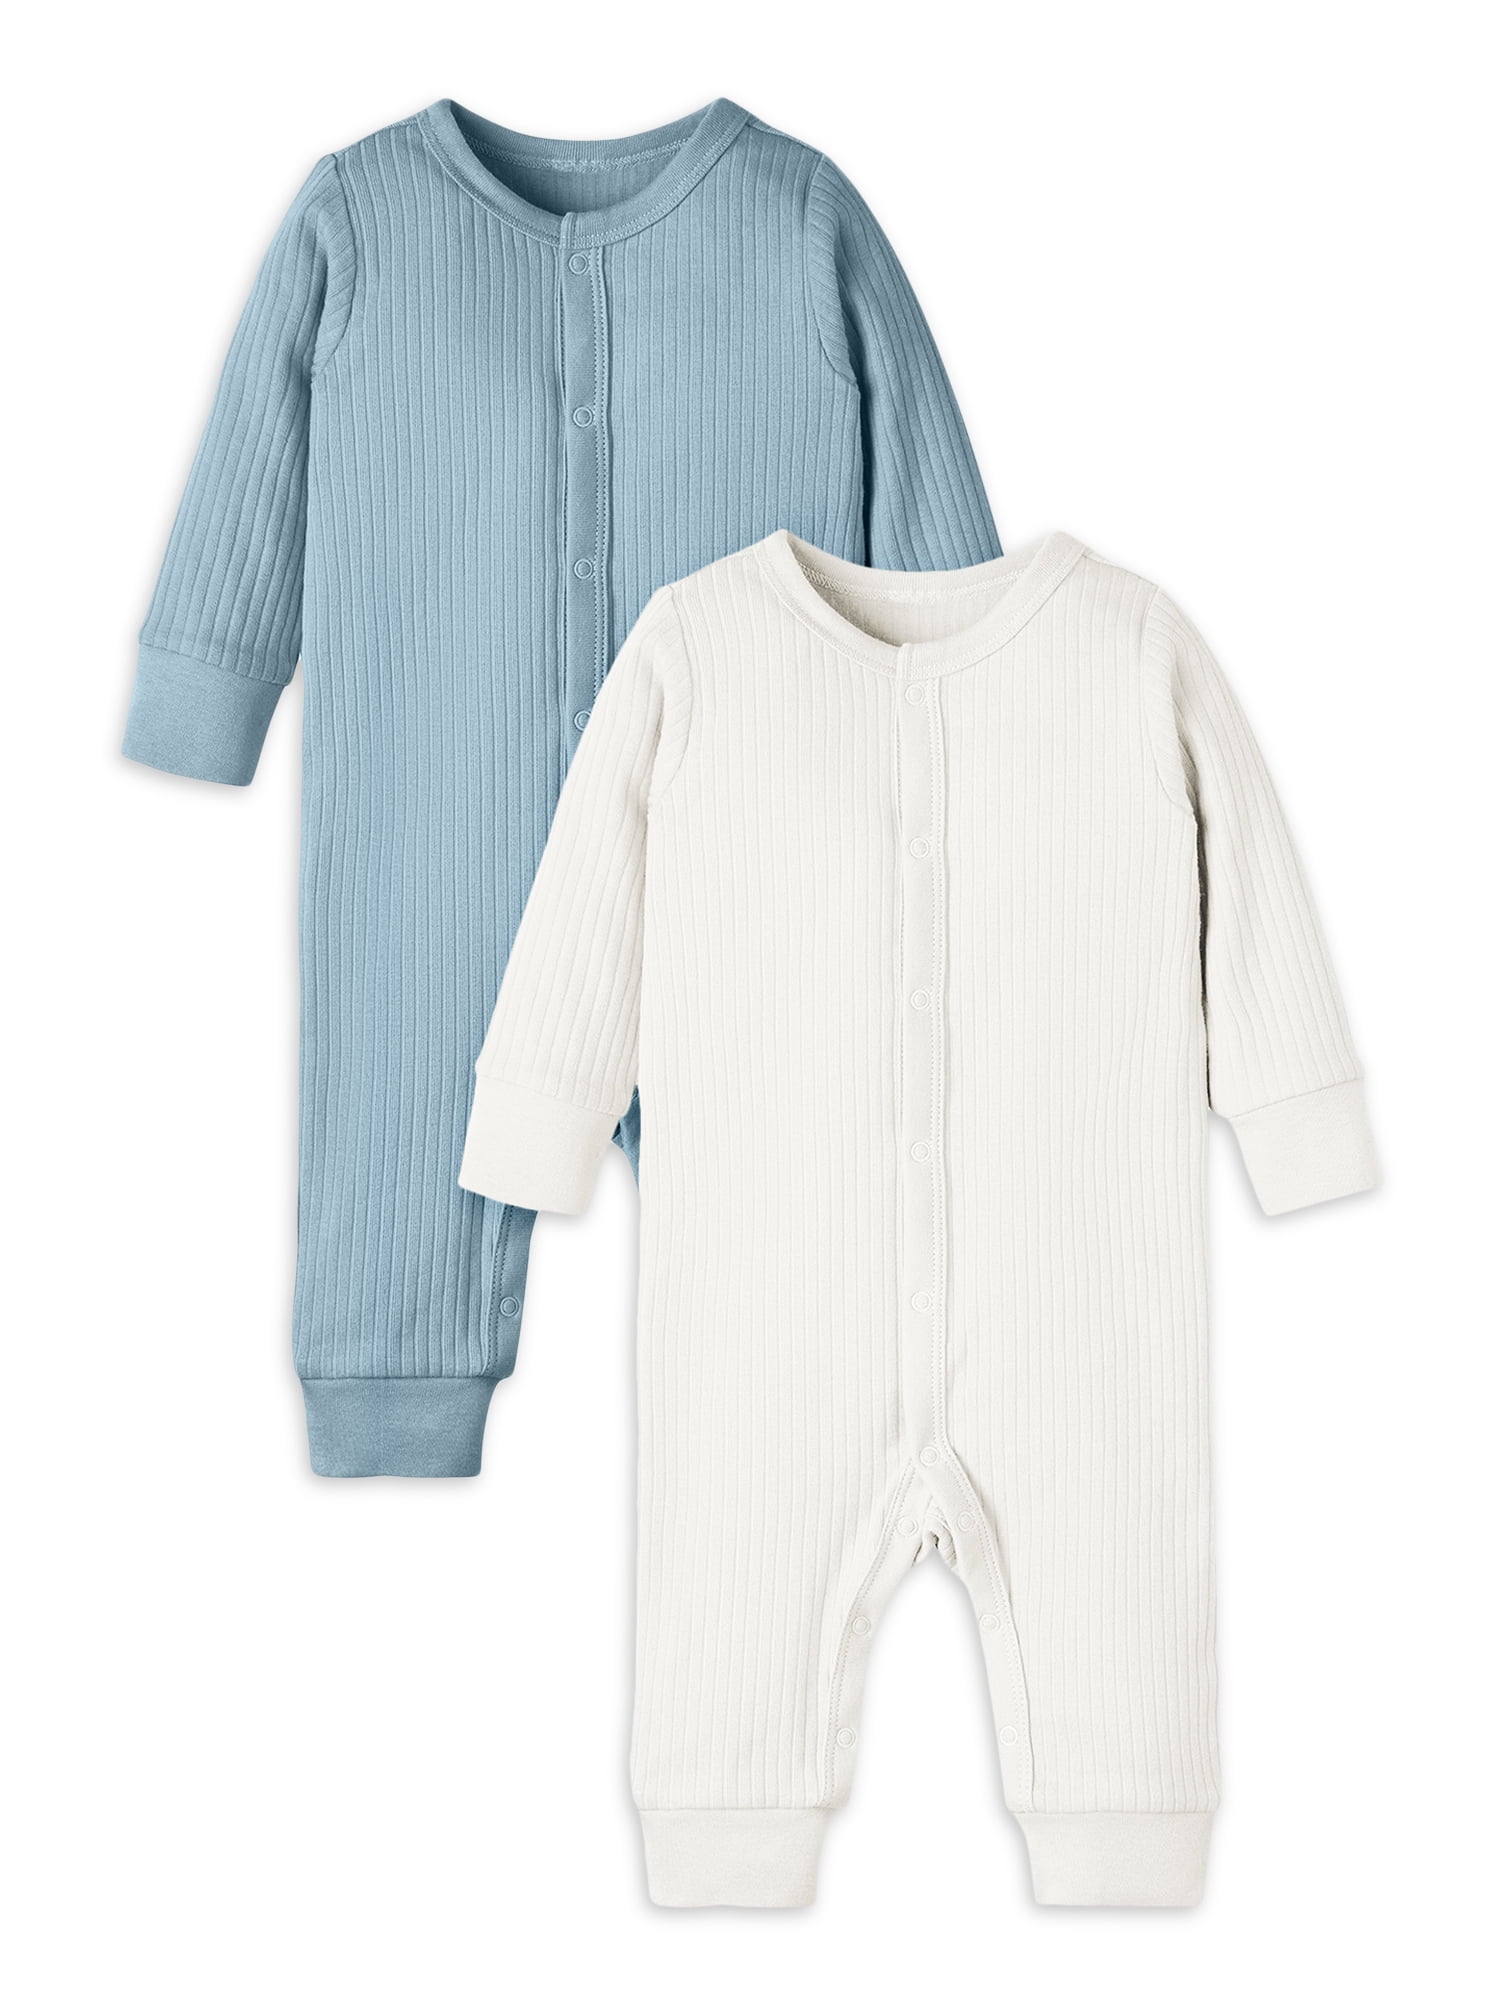 Modern Moments by Gerber Baby Boy Coveralls, 2-Pack, Sizes Newborn-12 ...